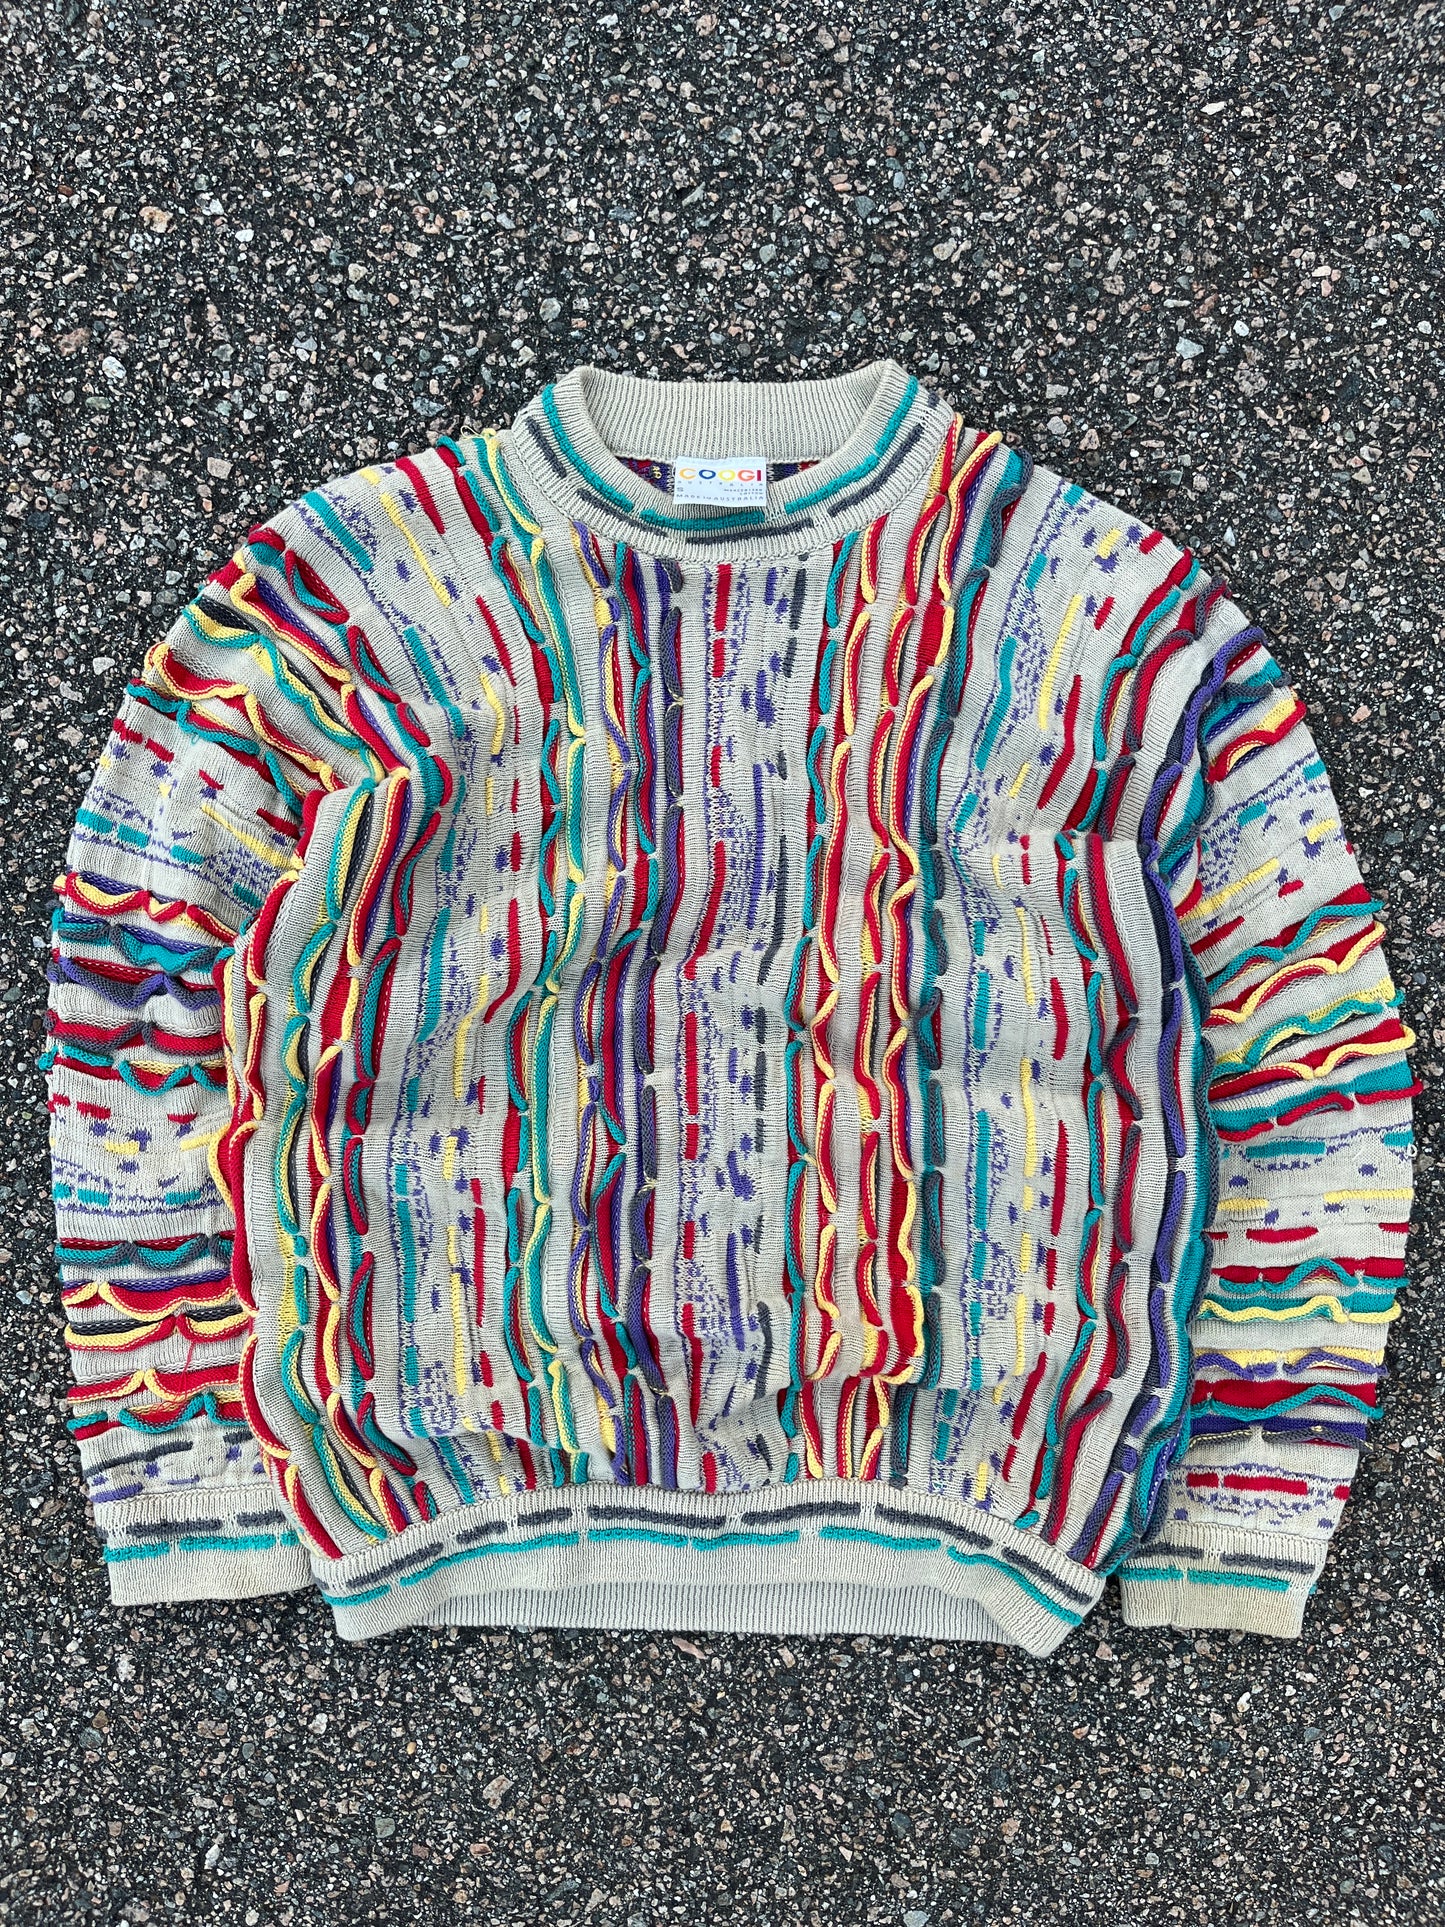 Coogi Made in Australia 3D Knit Cotton Sweater - Small